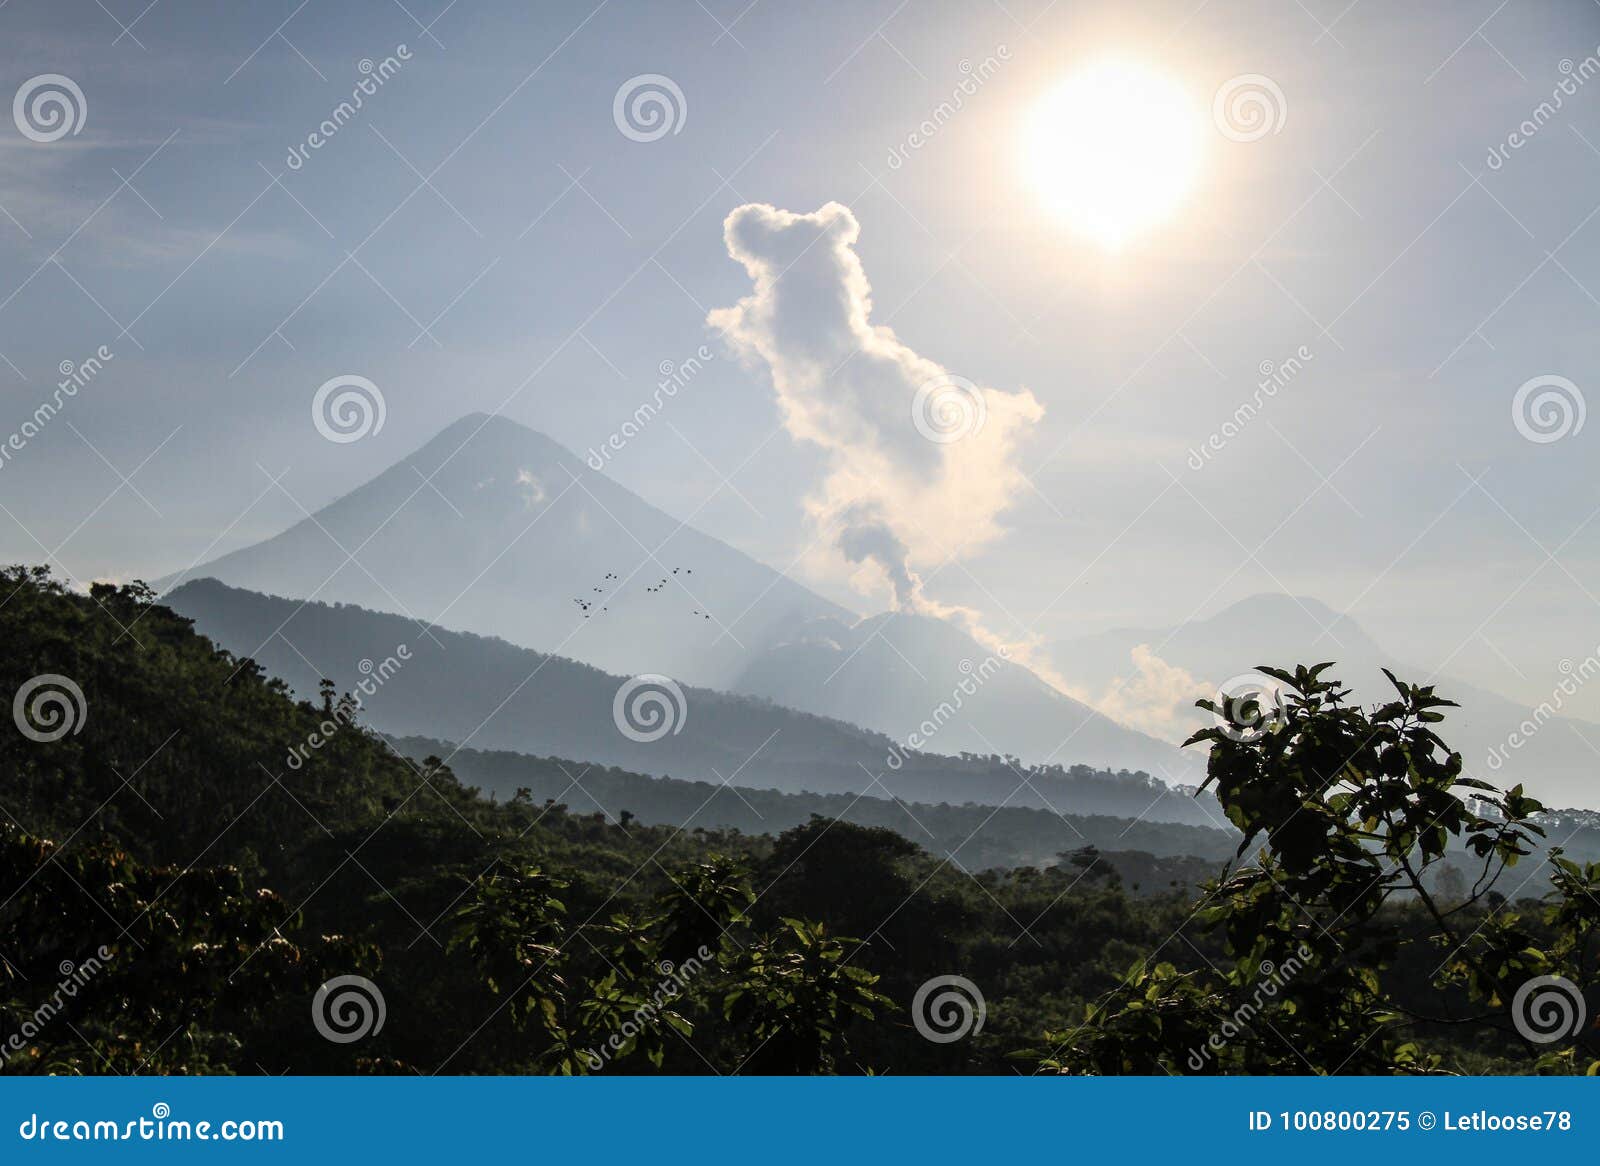 santiaguito erupting with santa maria at the background on a sunny morning, altiplano, guatemala